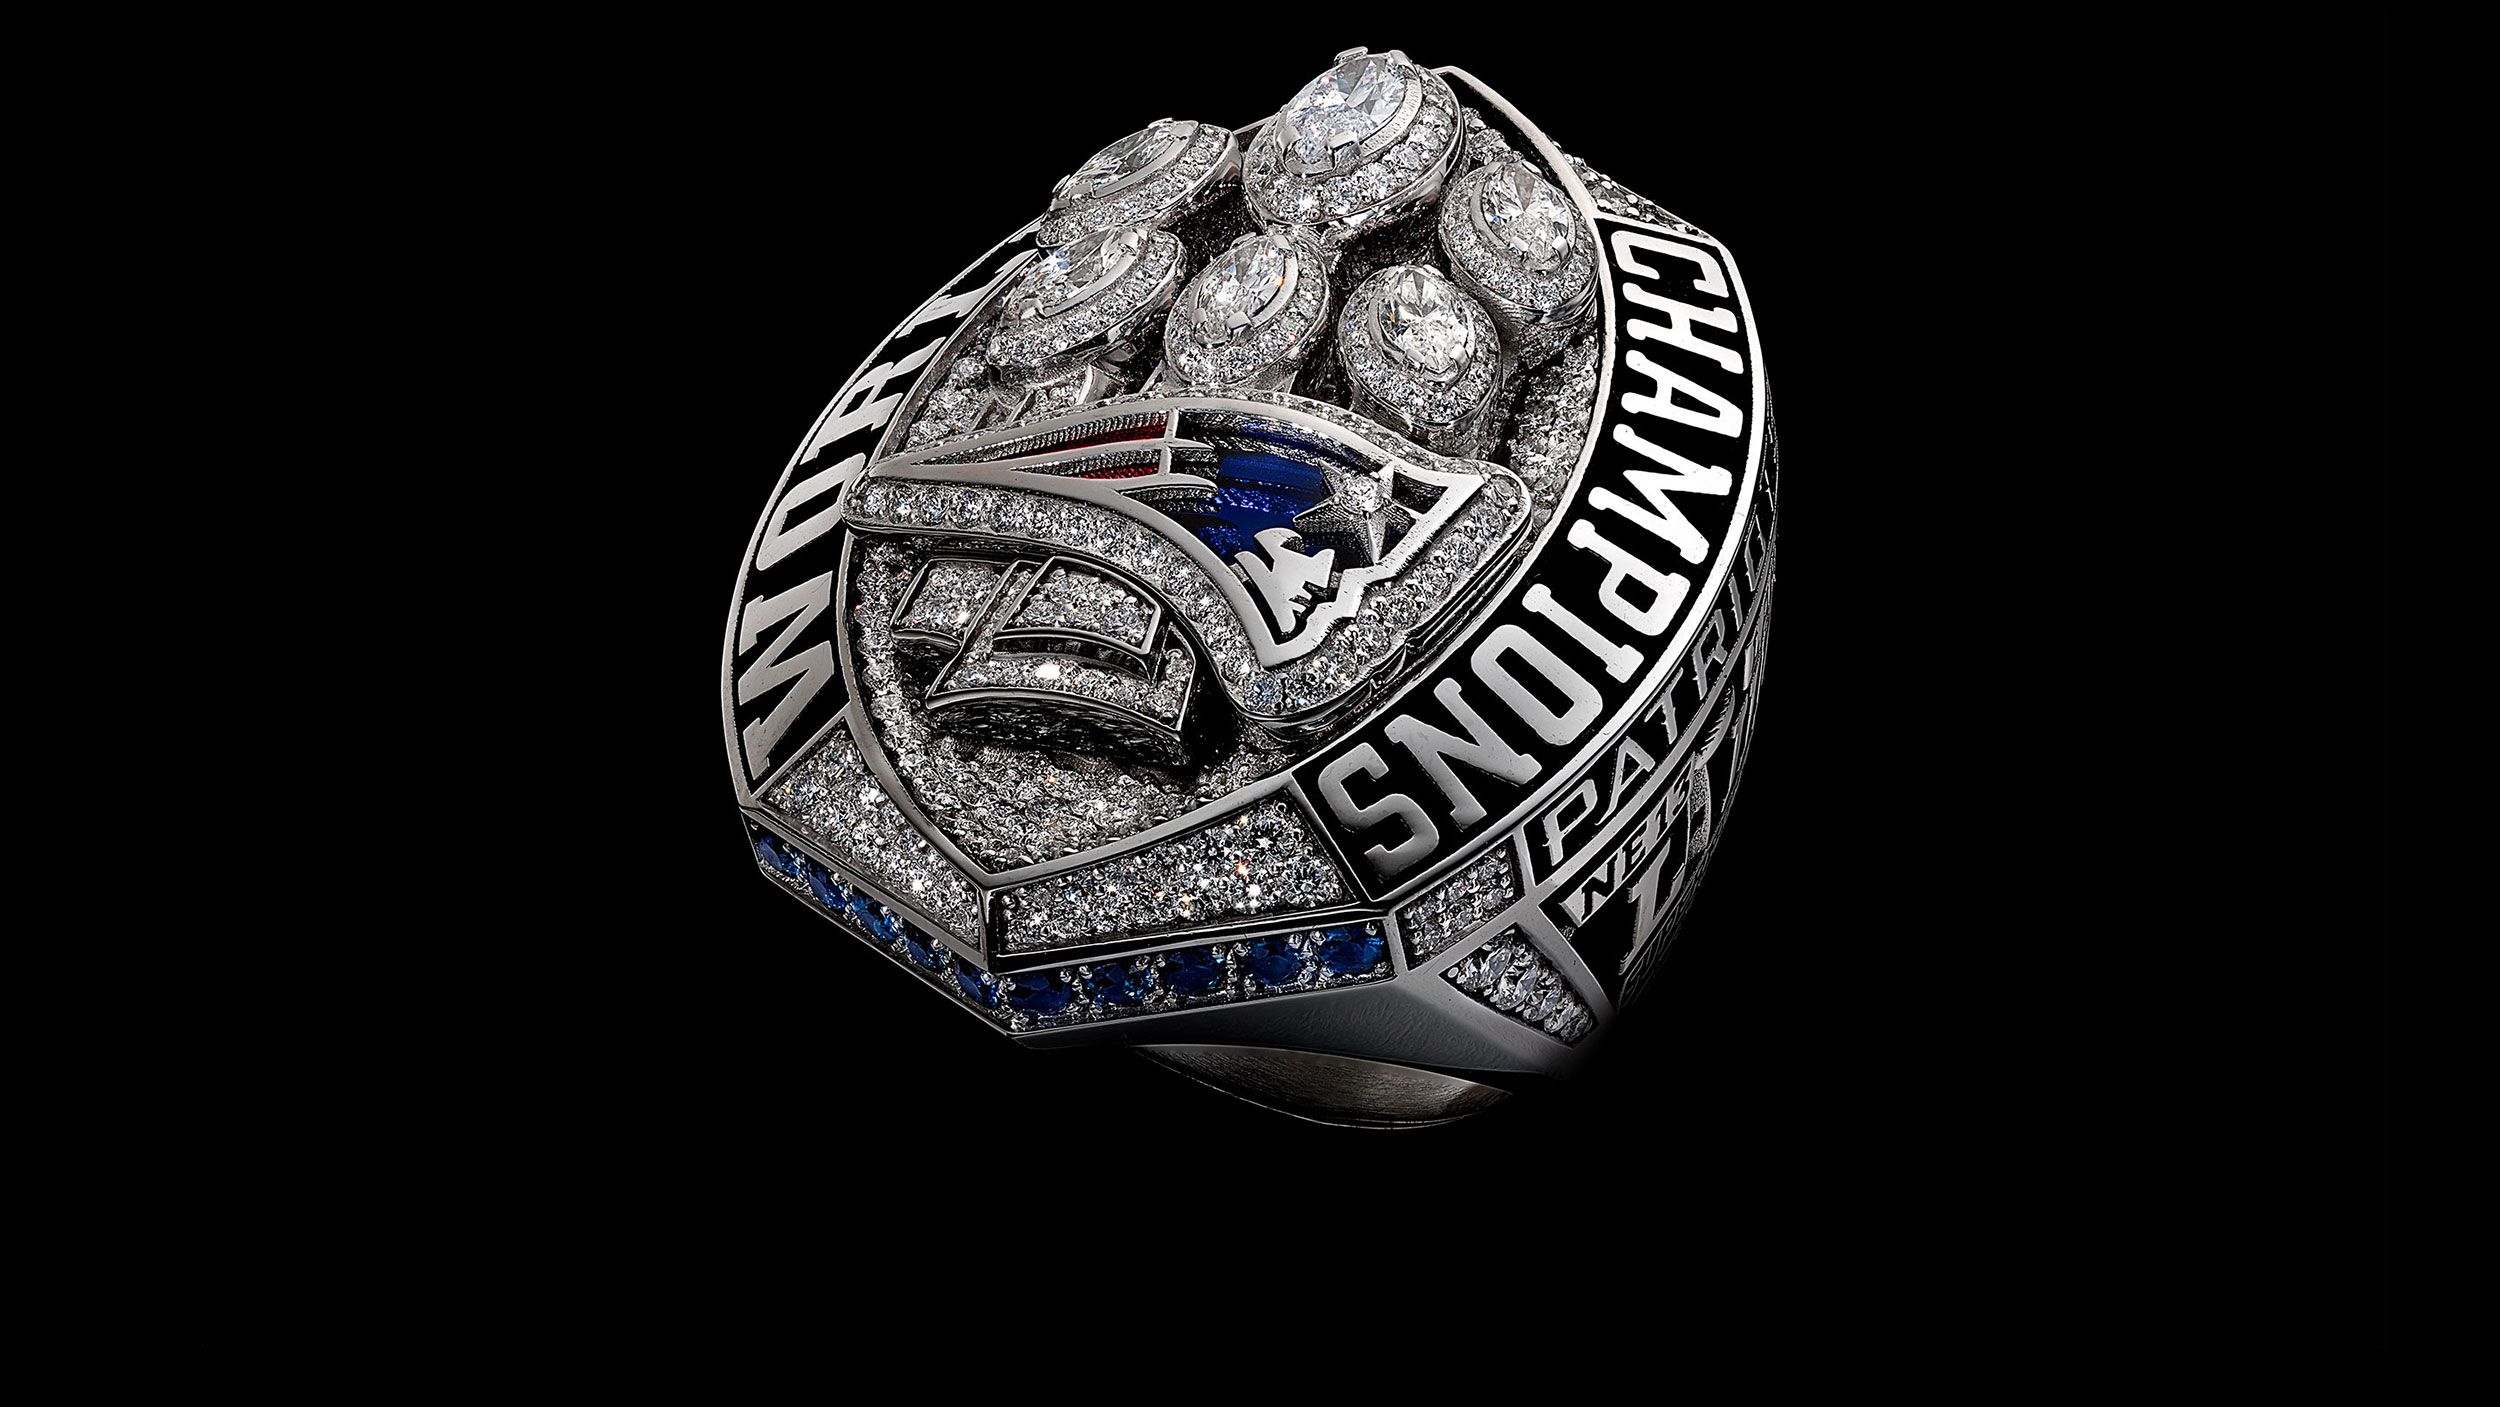 Tom Brady, Patriots flaunt 'greatest' Super Bowl ring of all-time